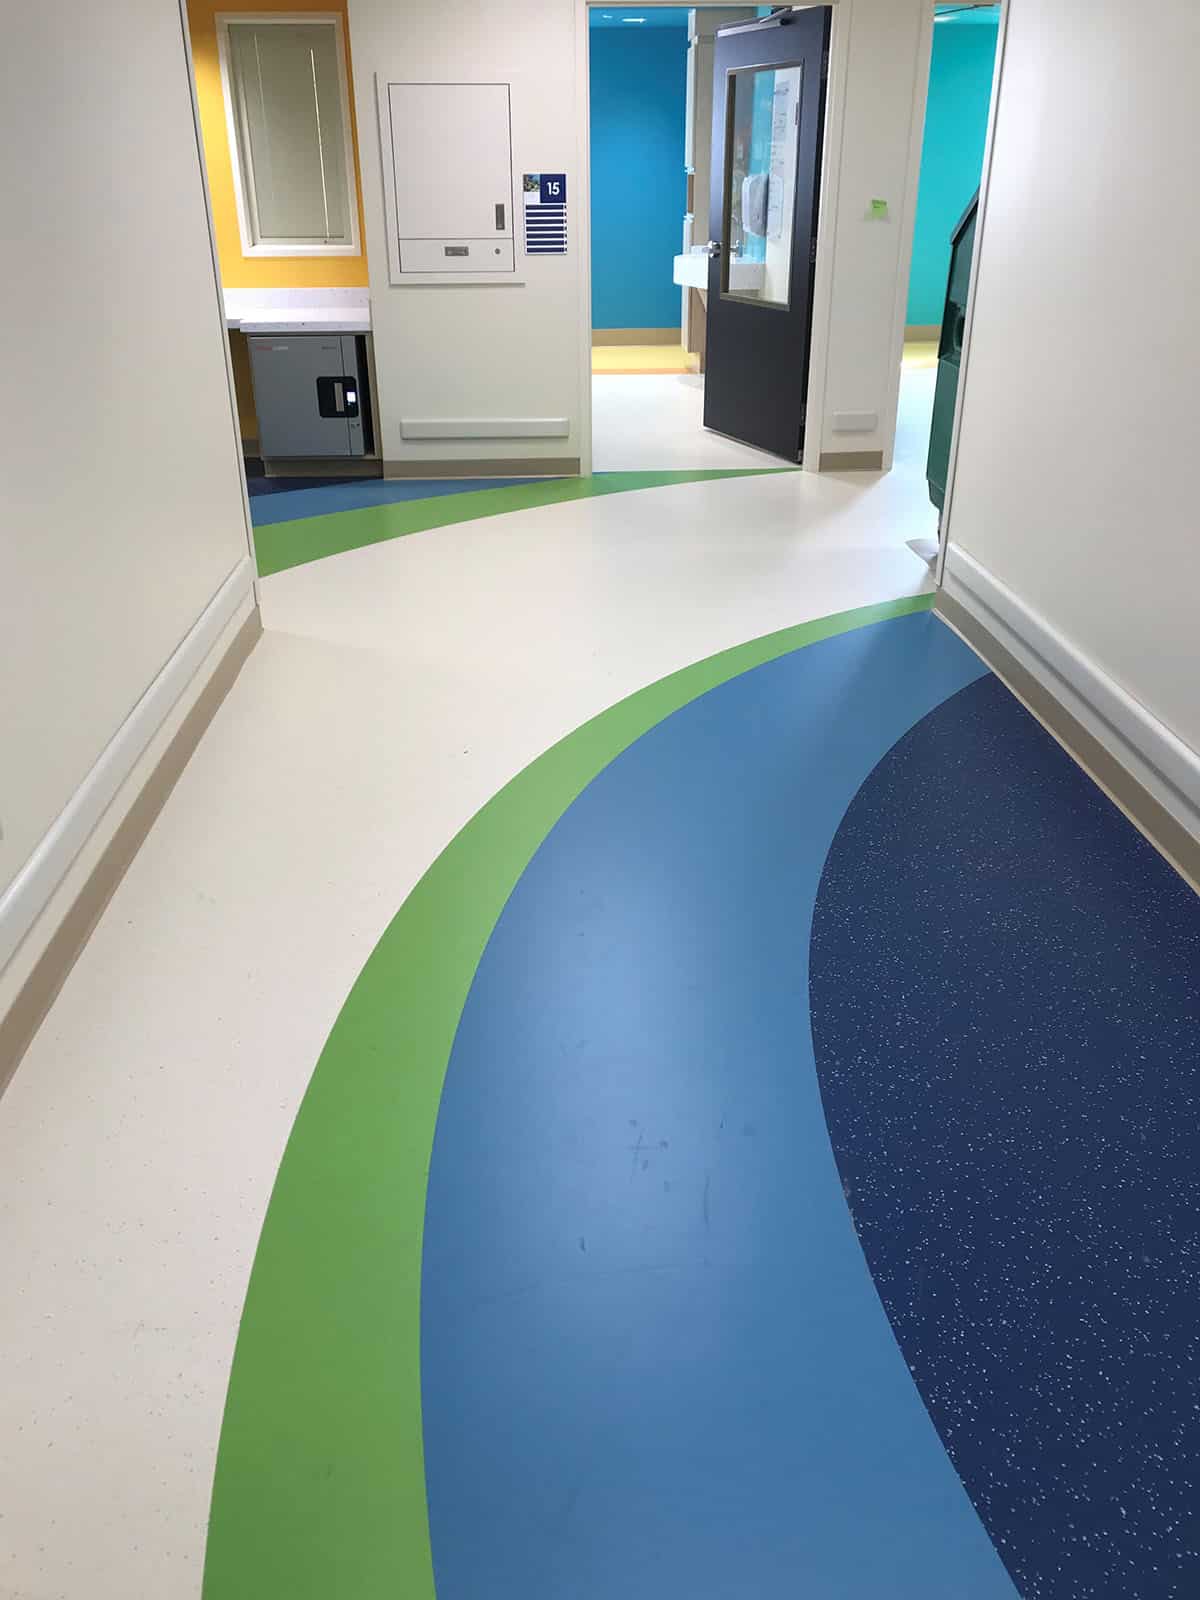 Hospital hallway flooring of blue, green and white tiles and a blue door